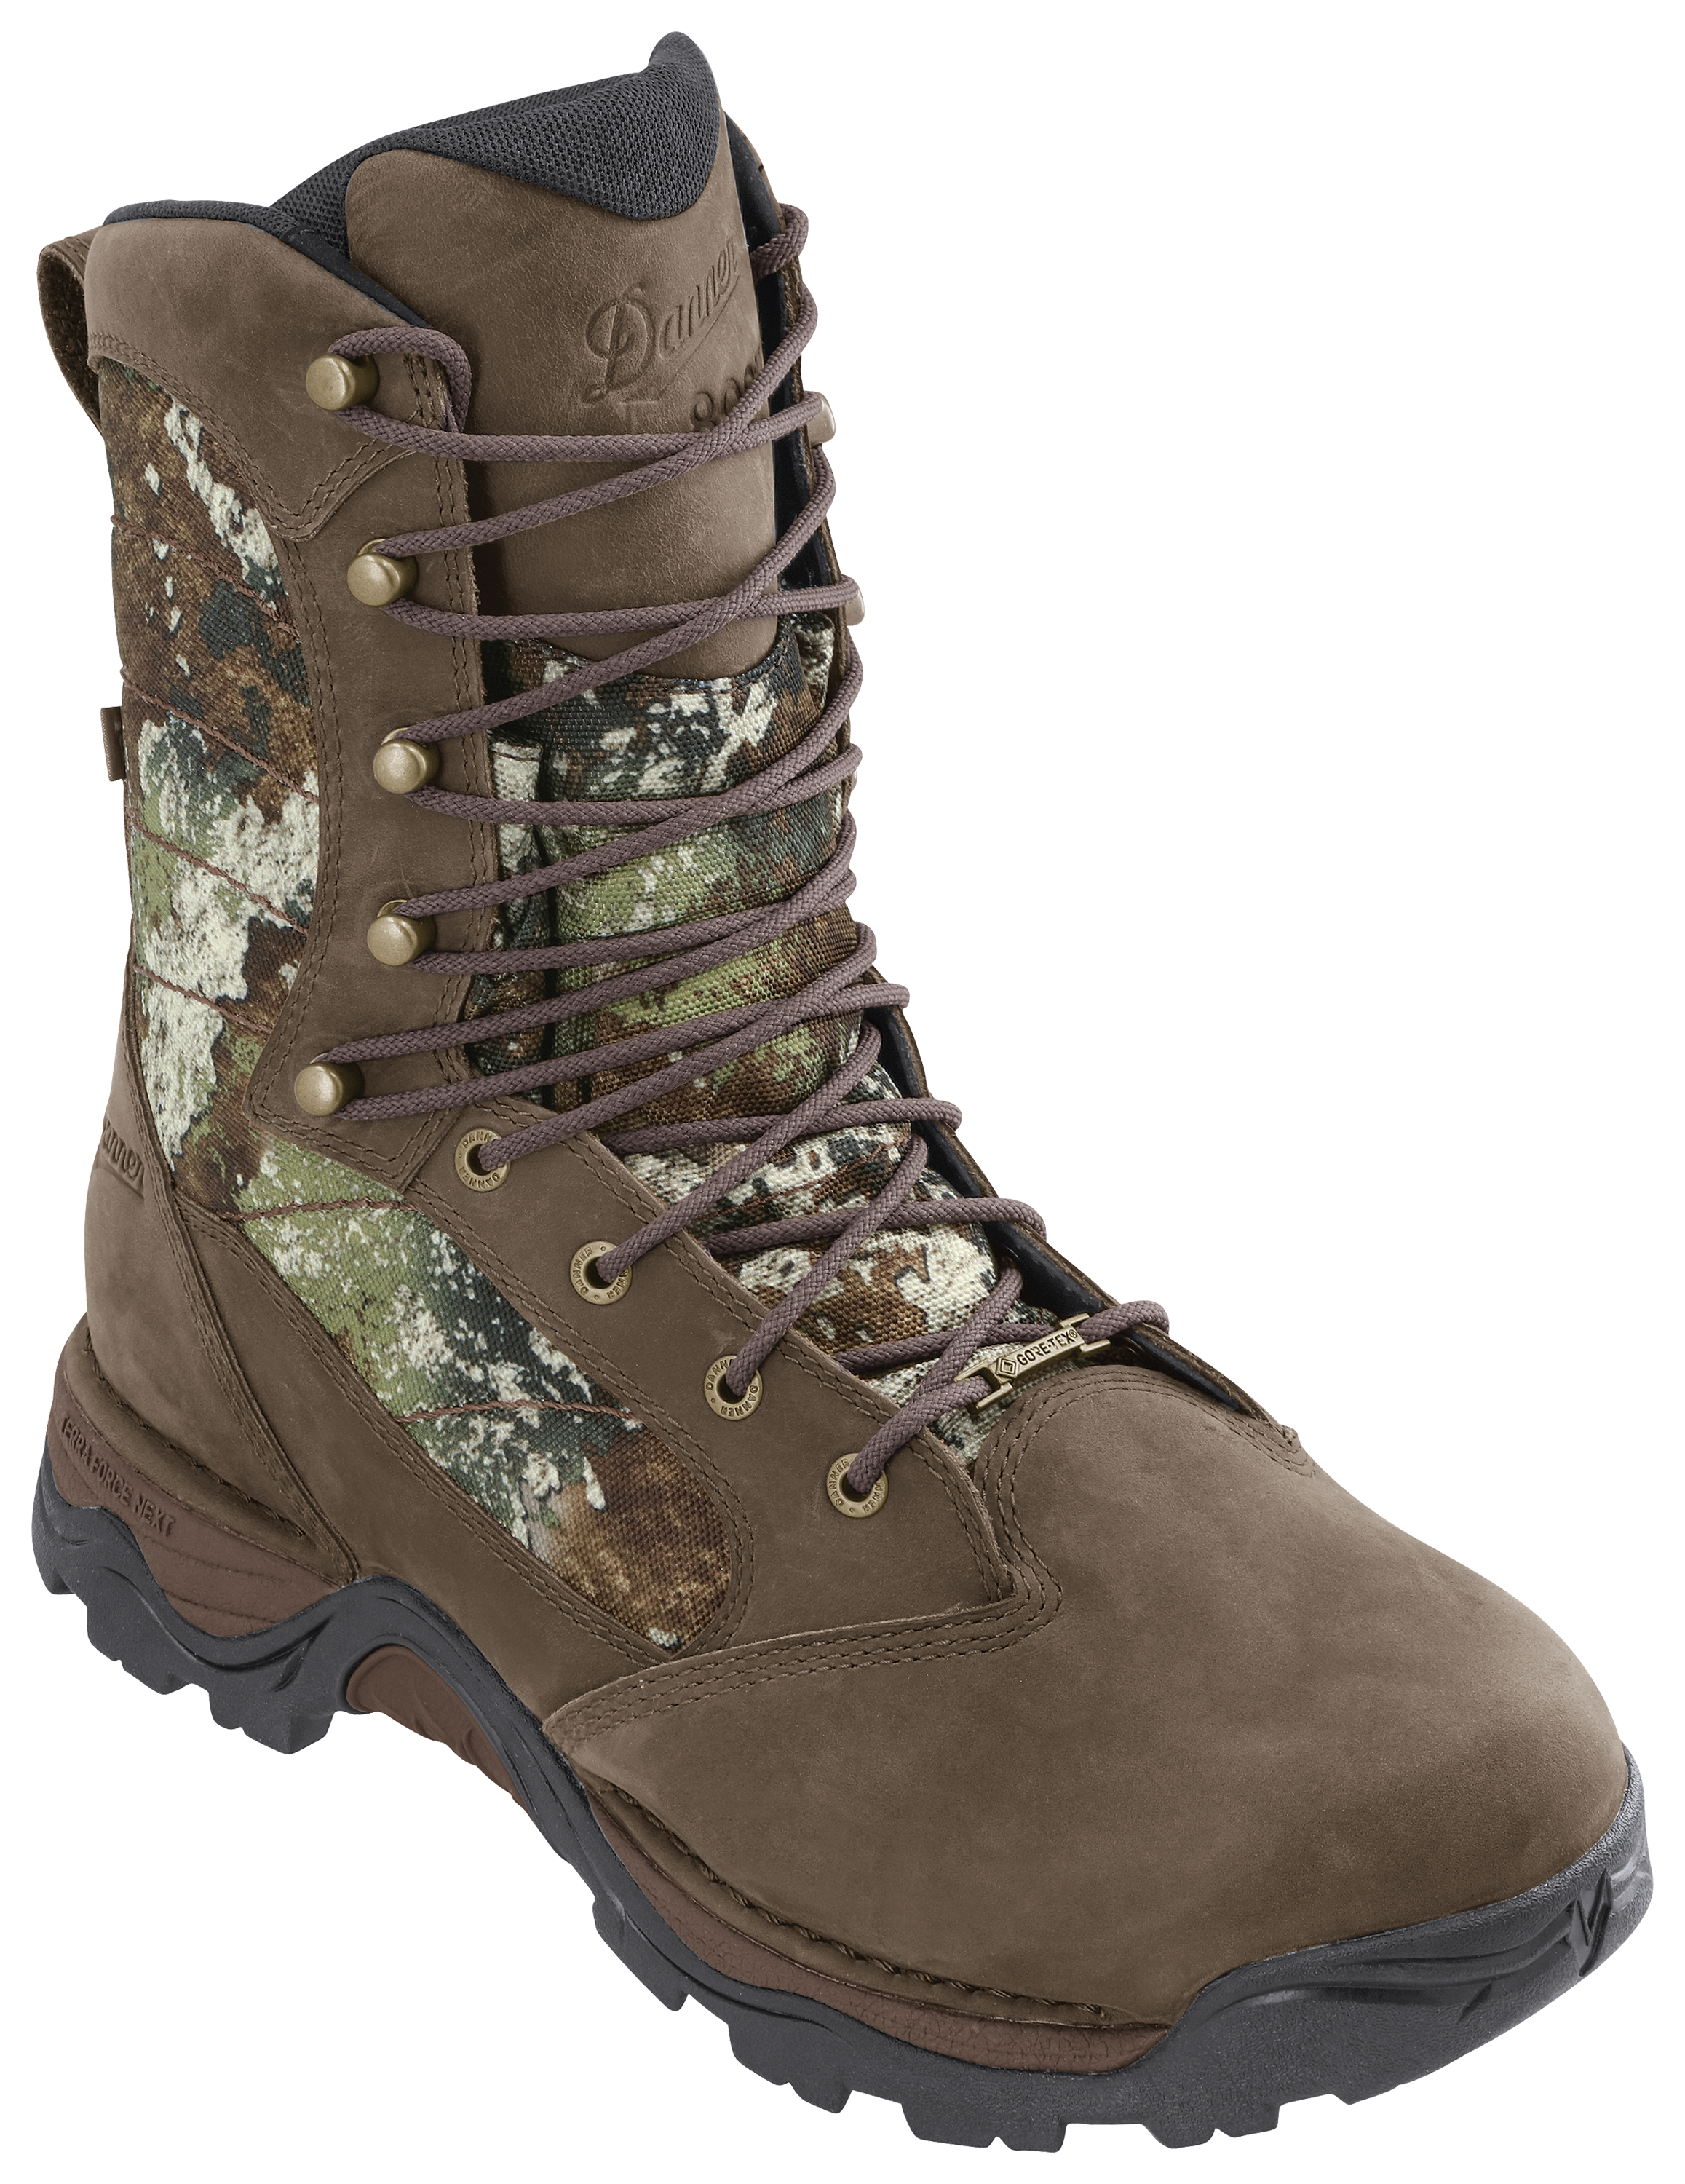 Danner Pronghorn 800 TrueTimber Strata Insulated GORE-TEX Hunting Boots for Men - 8M